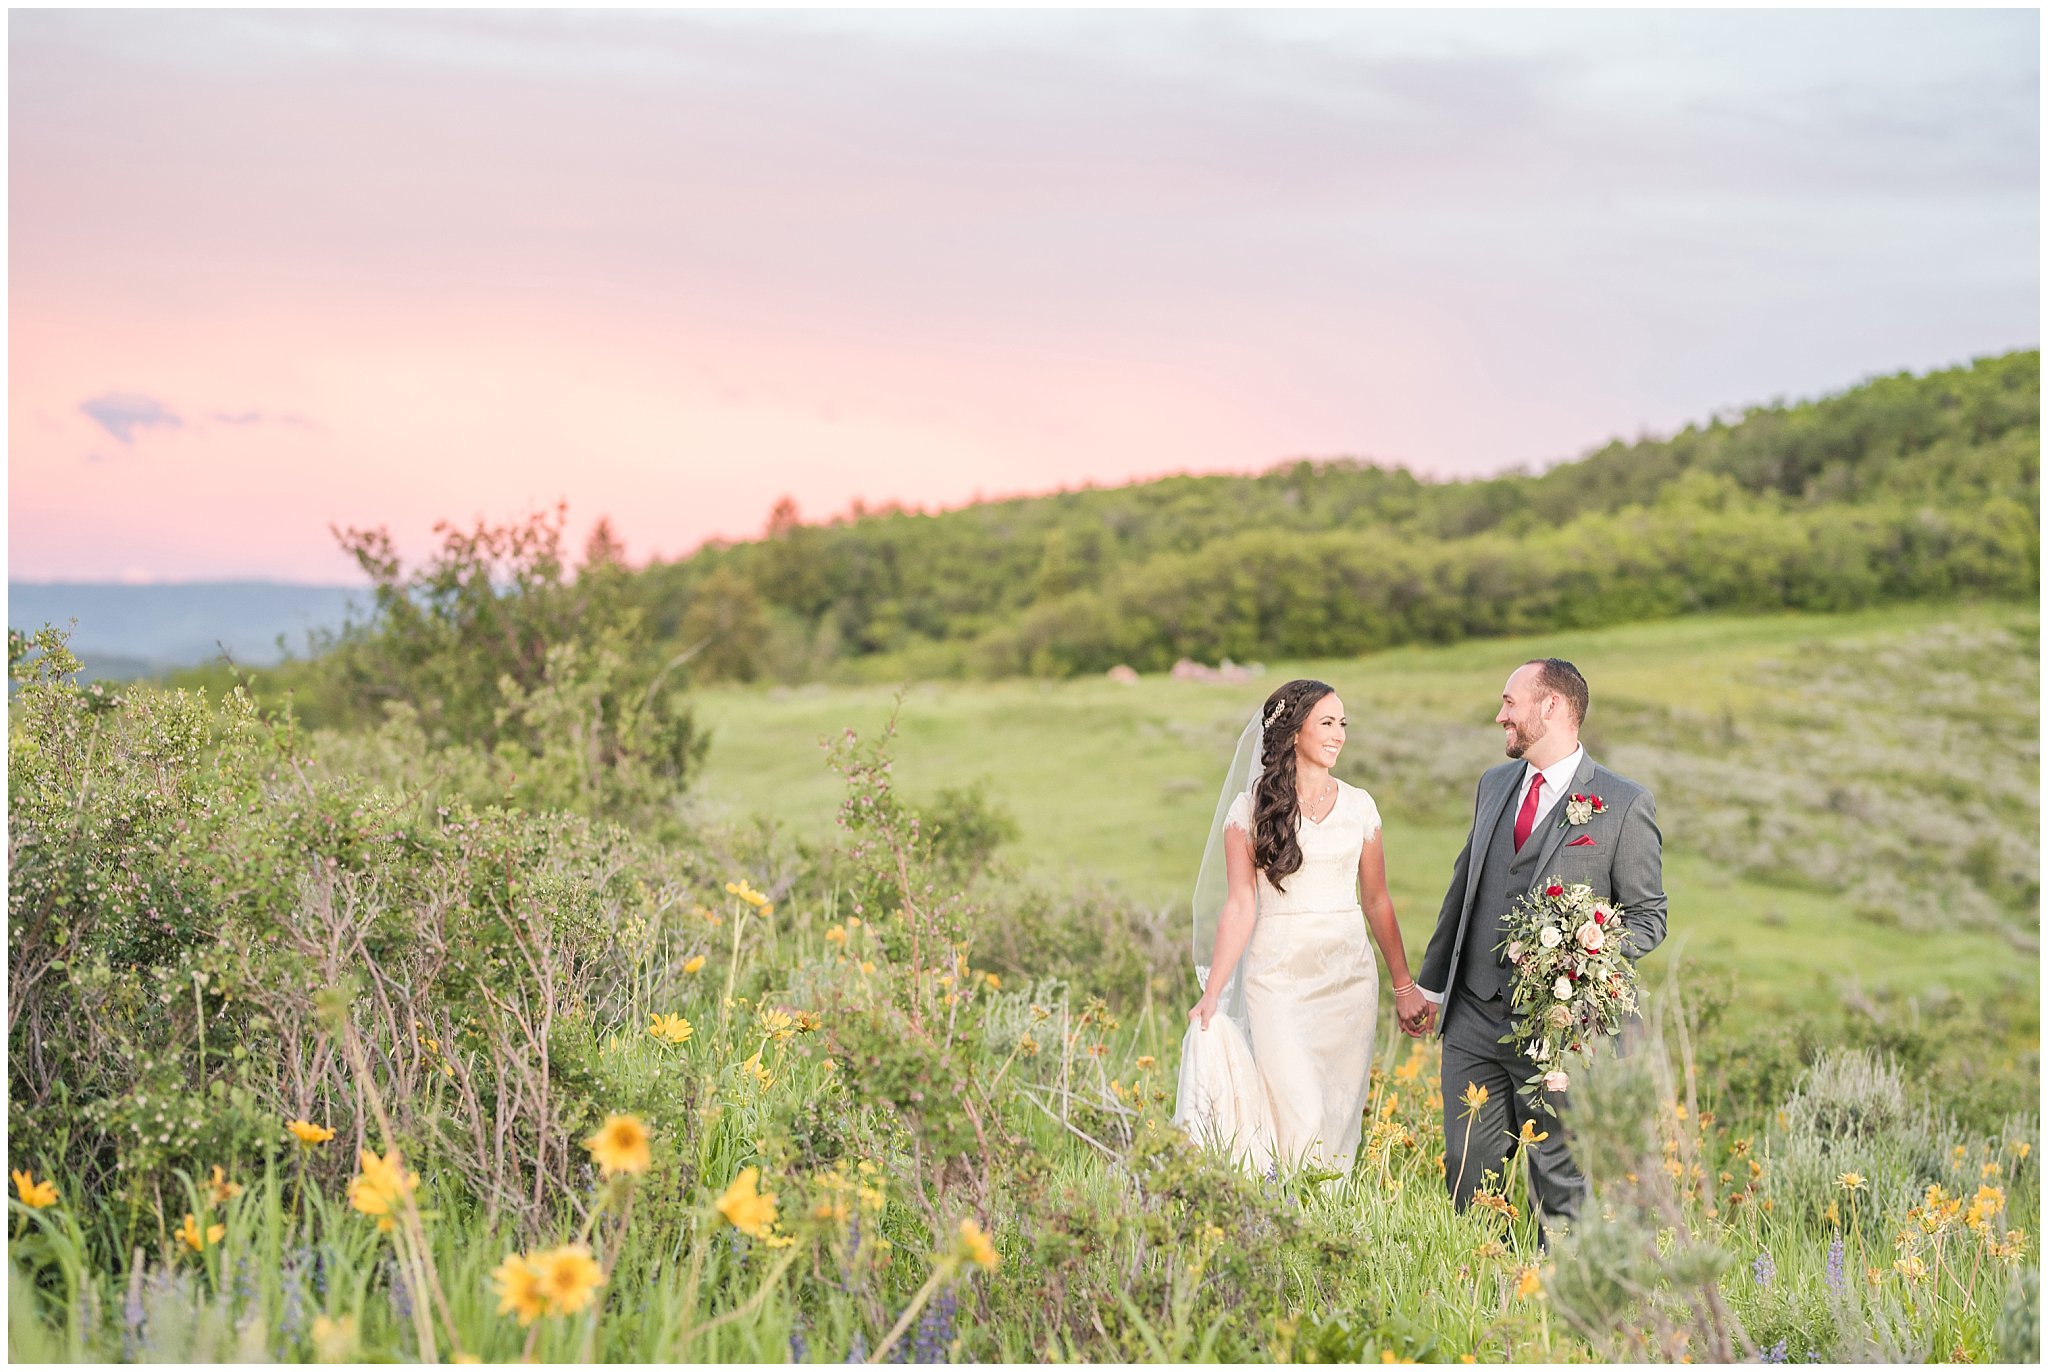 Bride and groom portraits in the mountains with a sunset | Groom in grey suit and bride in beige and white dress with waterfall bouquet | Snowbasin Summer Formal Session | Utah Wedding Photographers | Jessie and Dallin